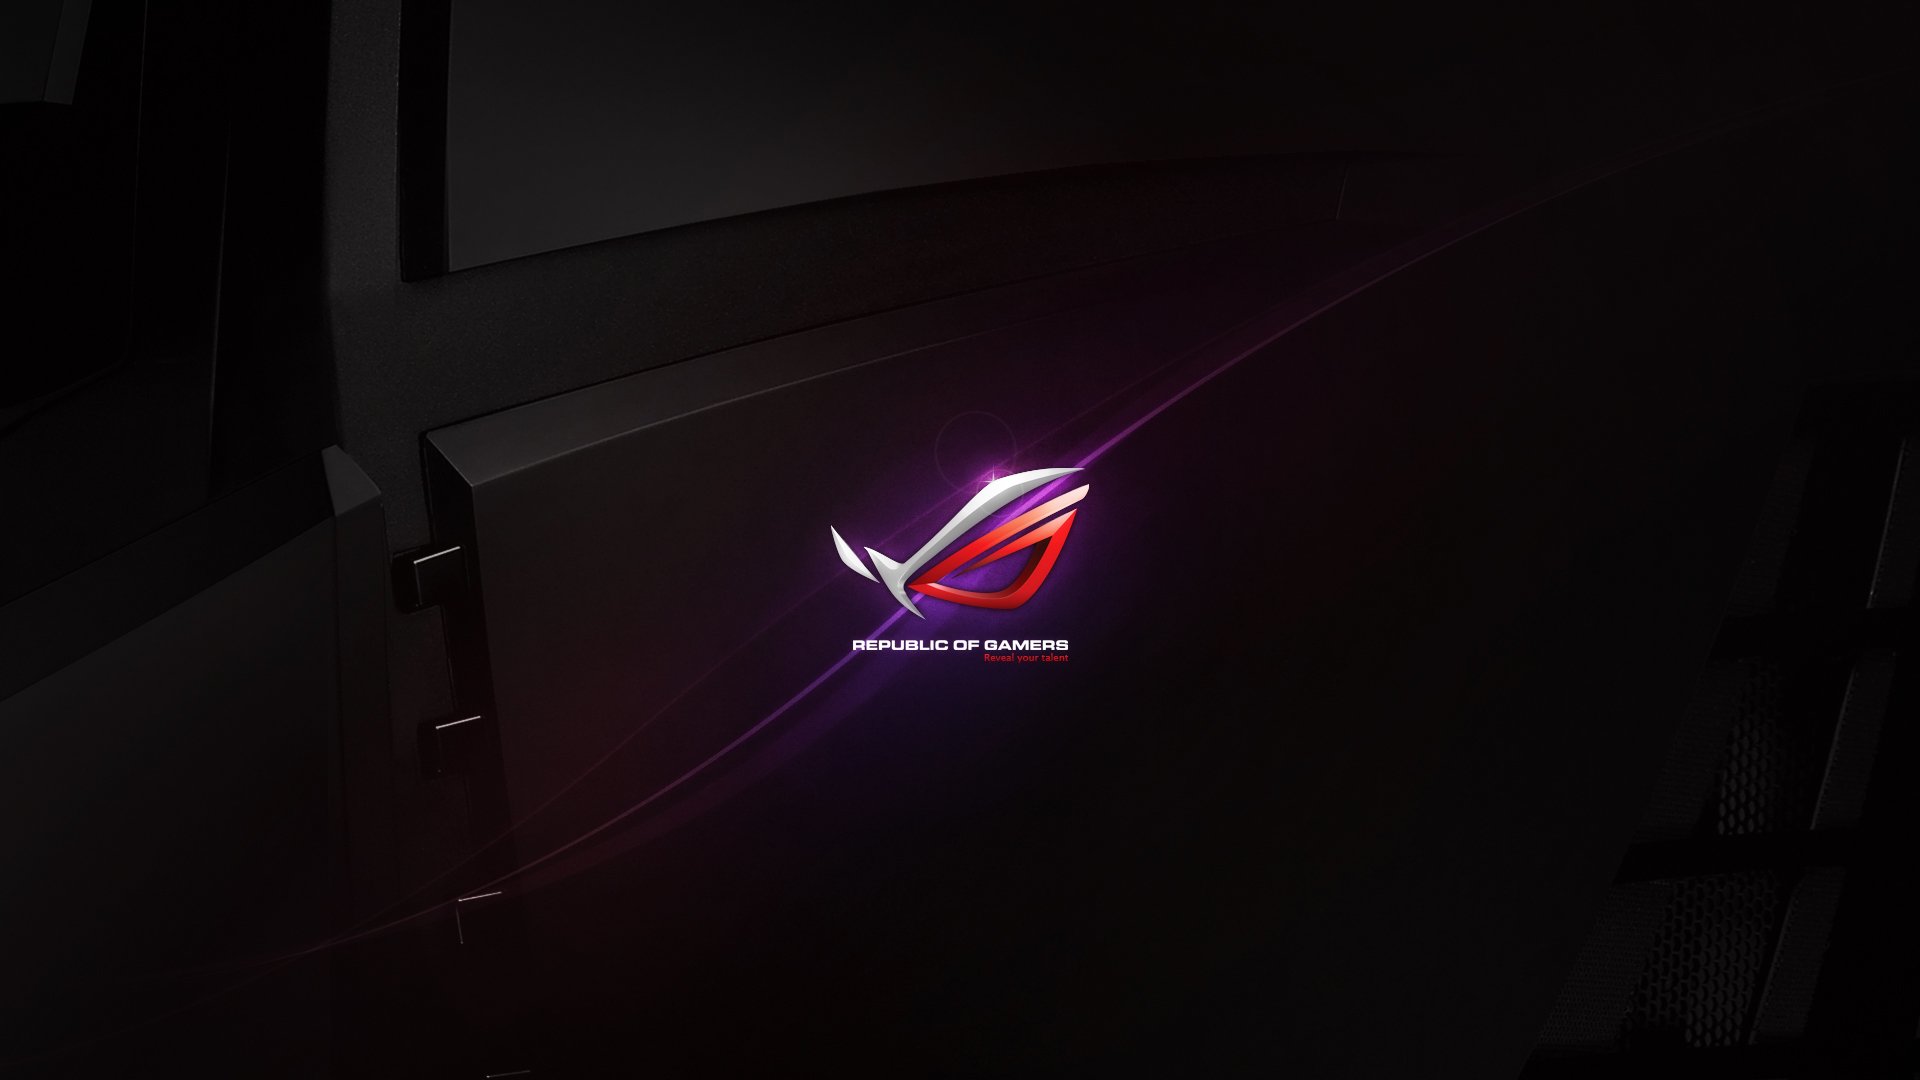 Download image Asus Rog 1920x1080 Desktop Backgrounds PC Android 1920x1080